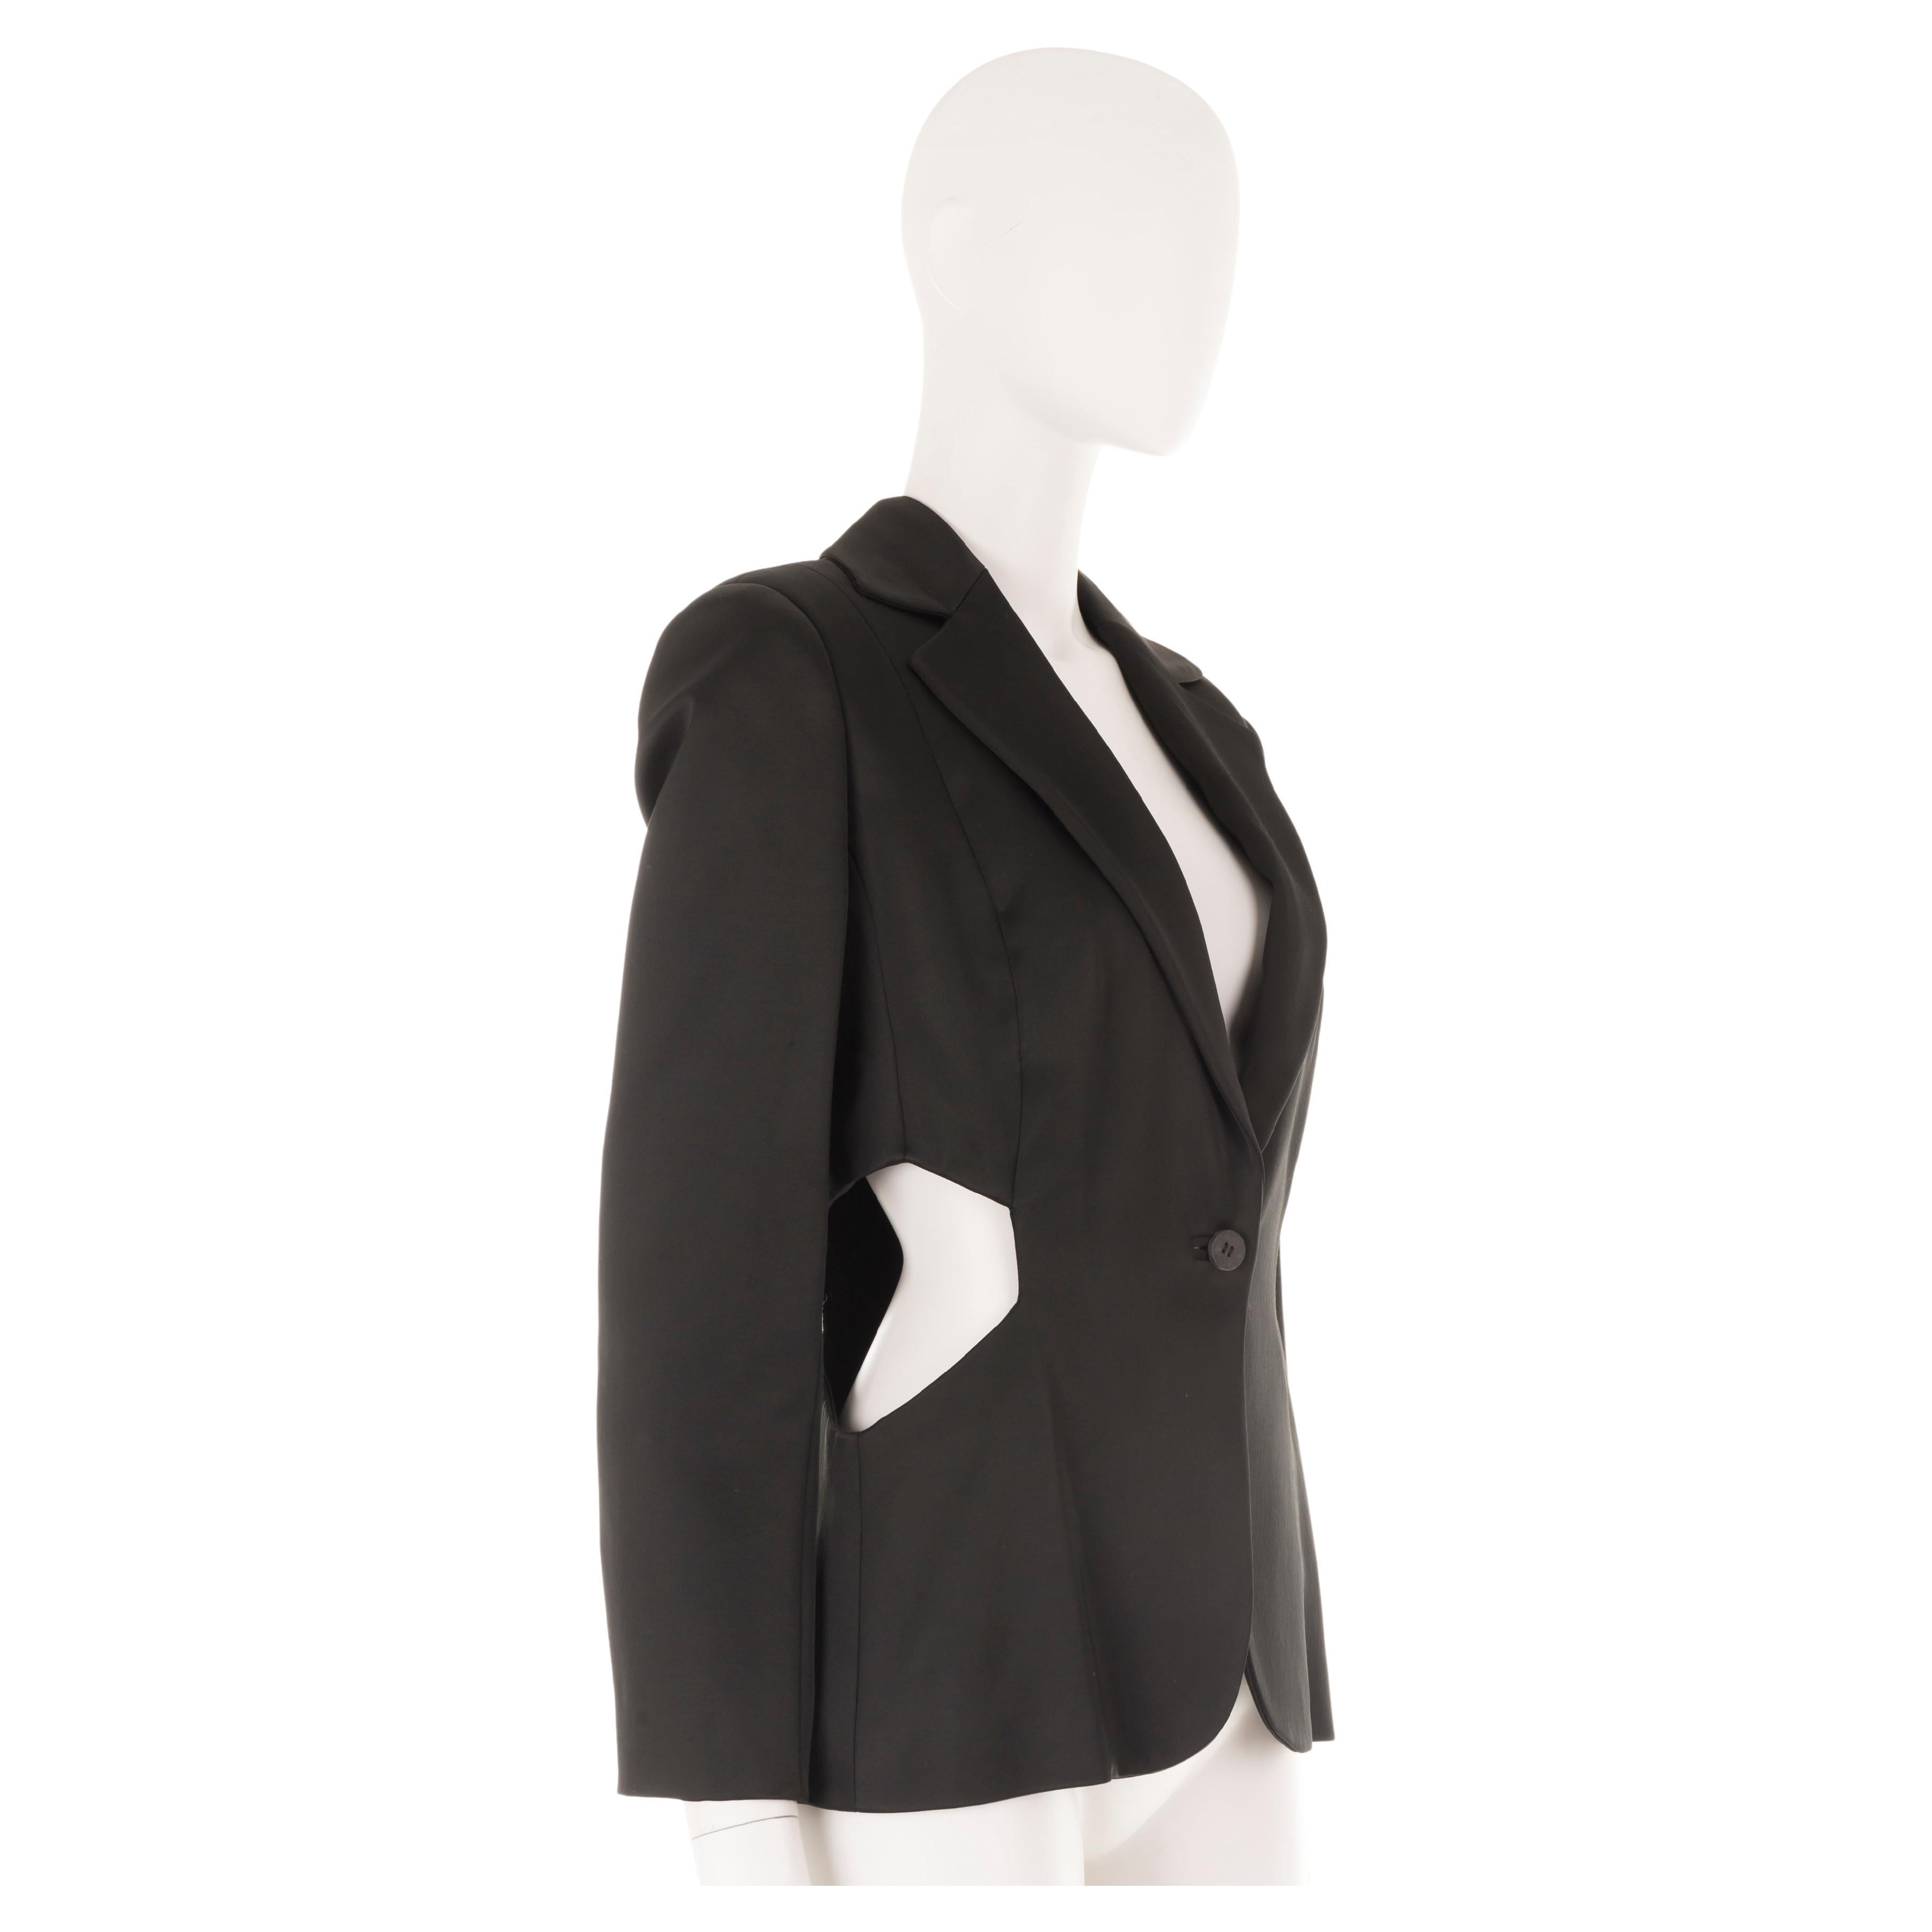 - Black structured blazer
- Double waist cut-out
- Padded shoulders
- Size M
